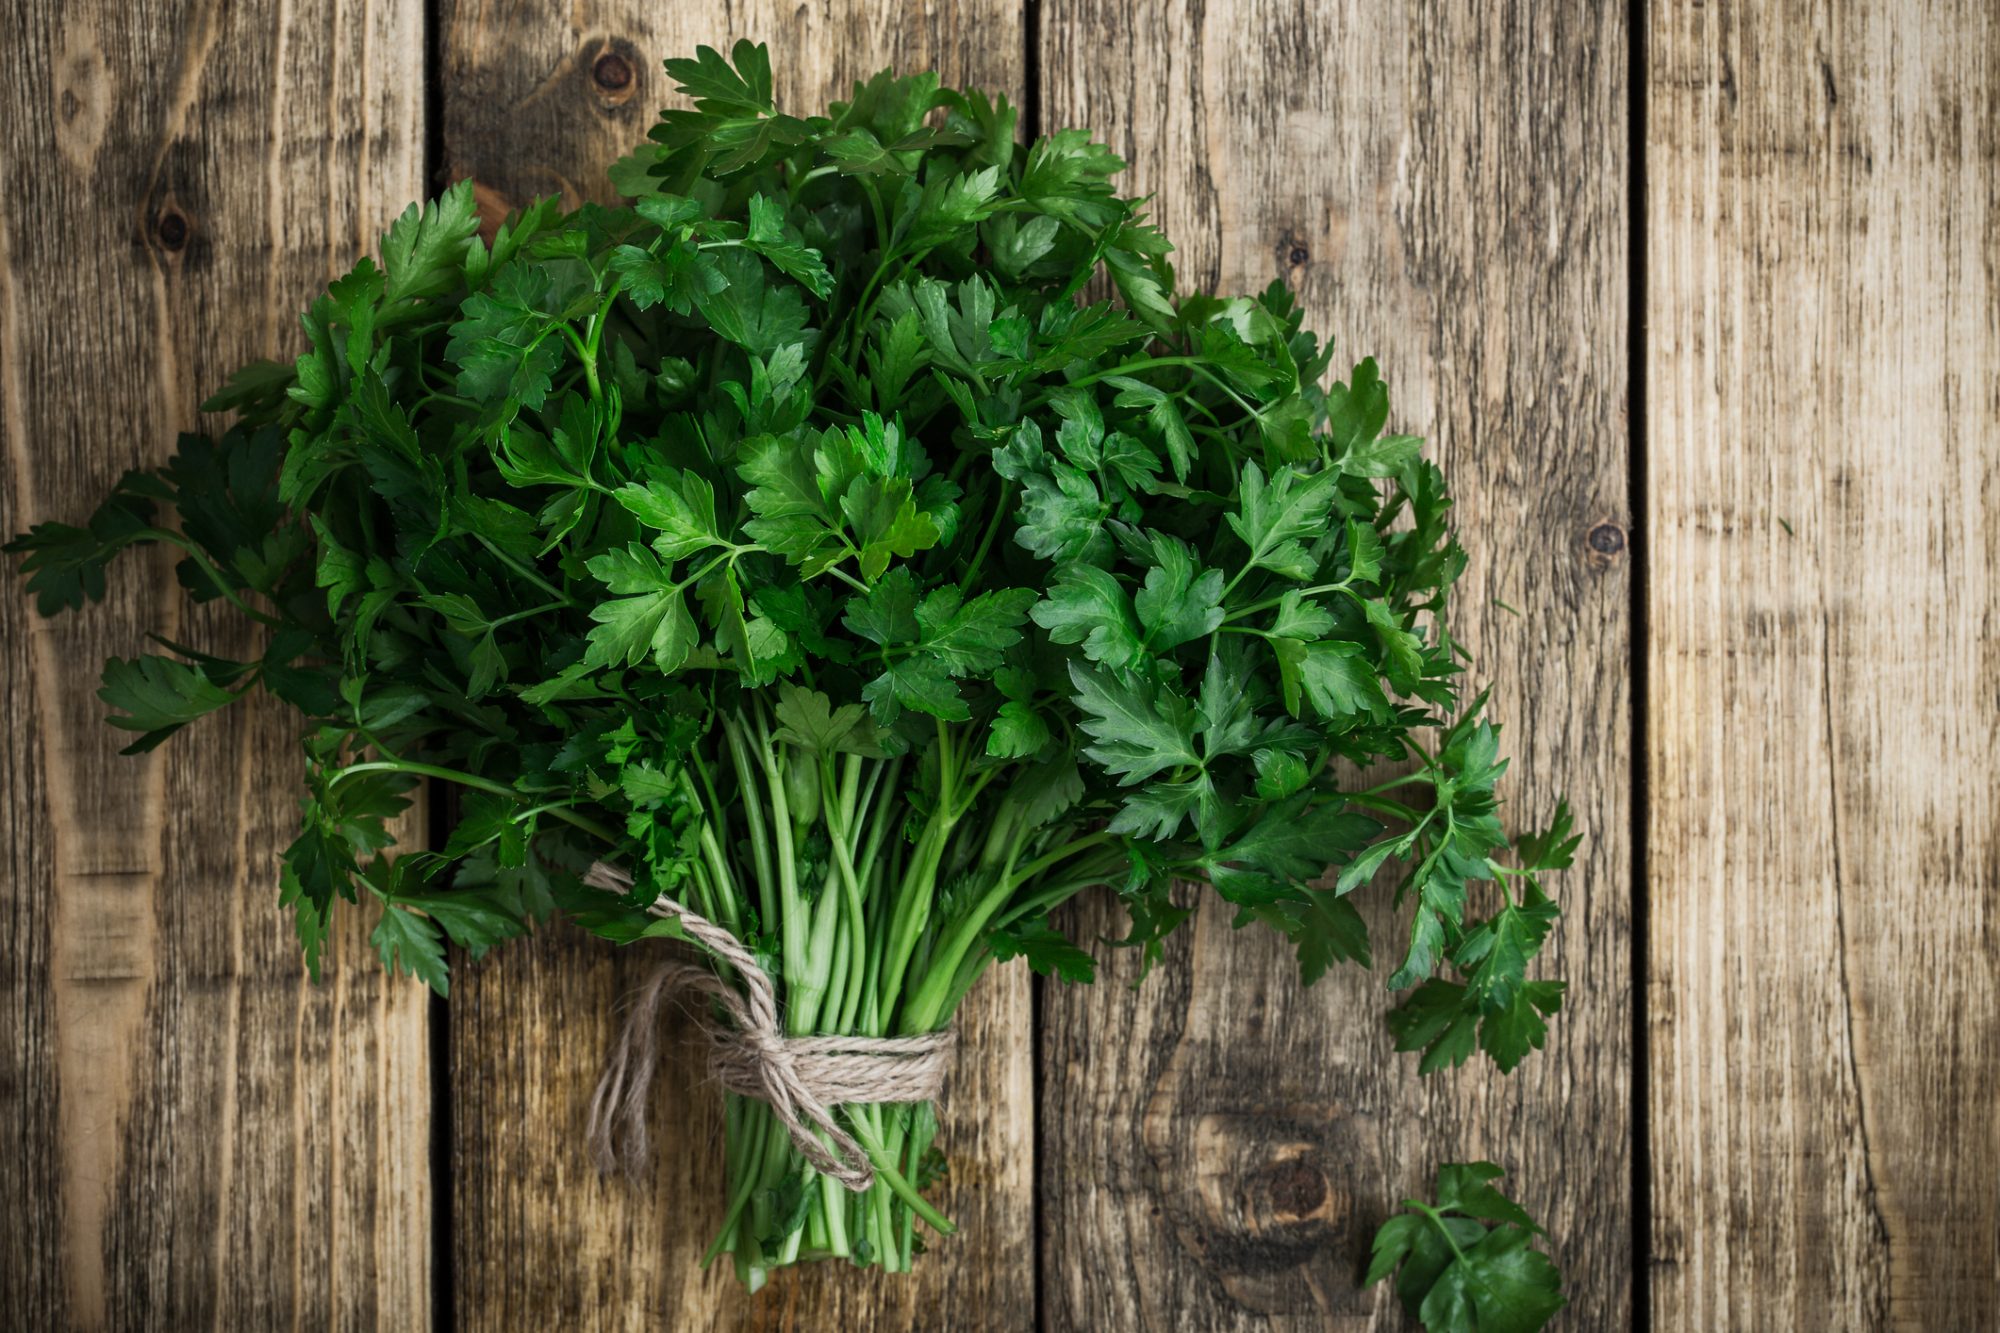 Fresh organic parsley over wooden background viewed from above